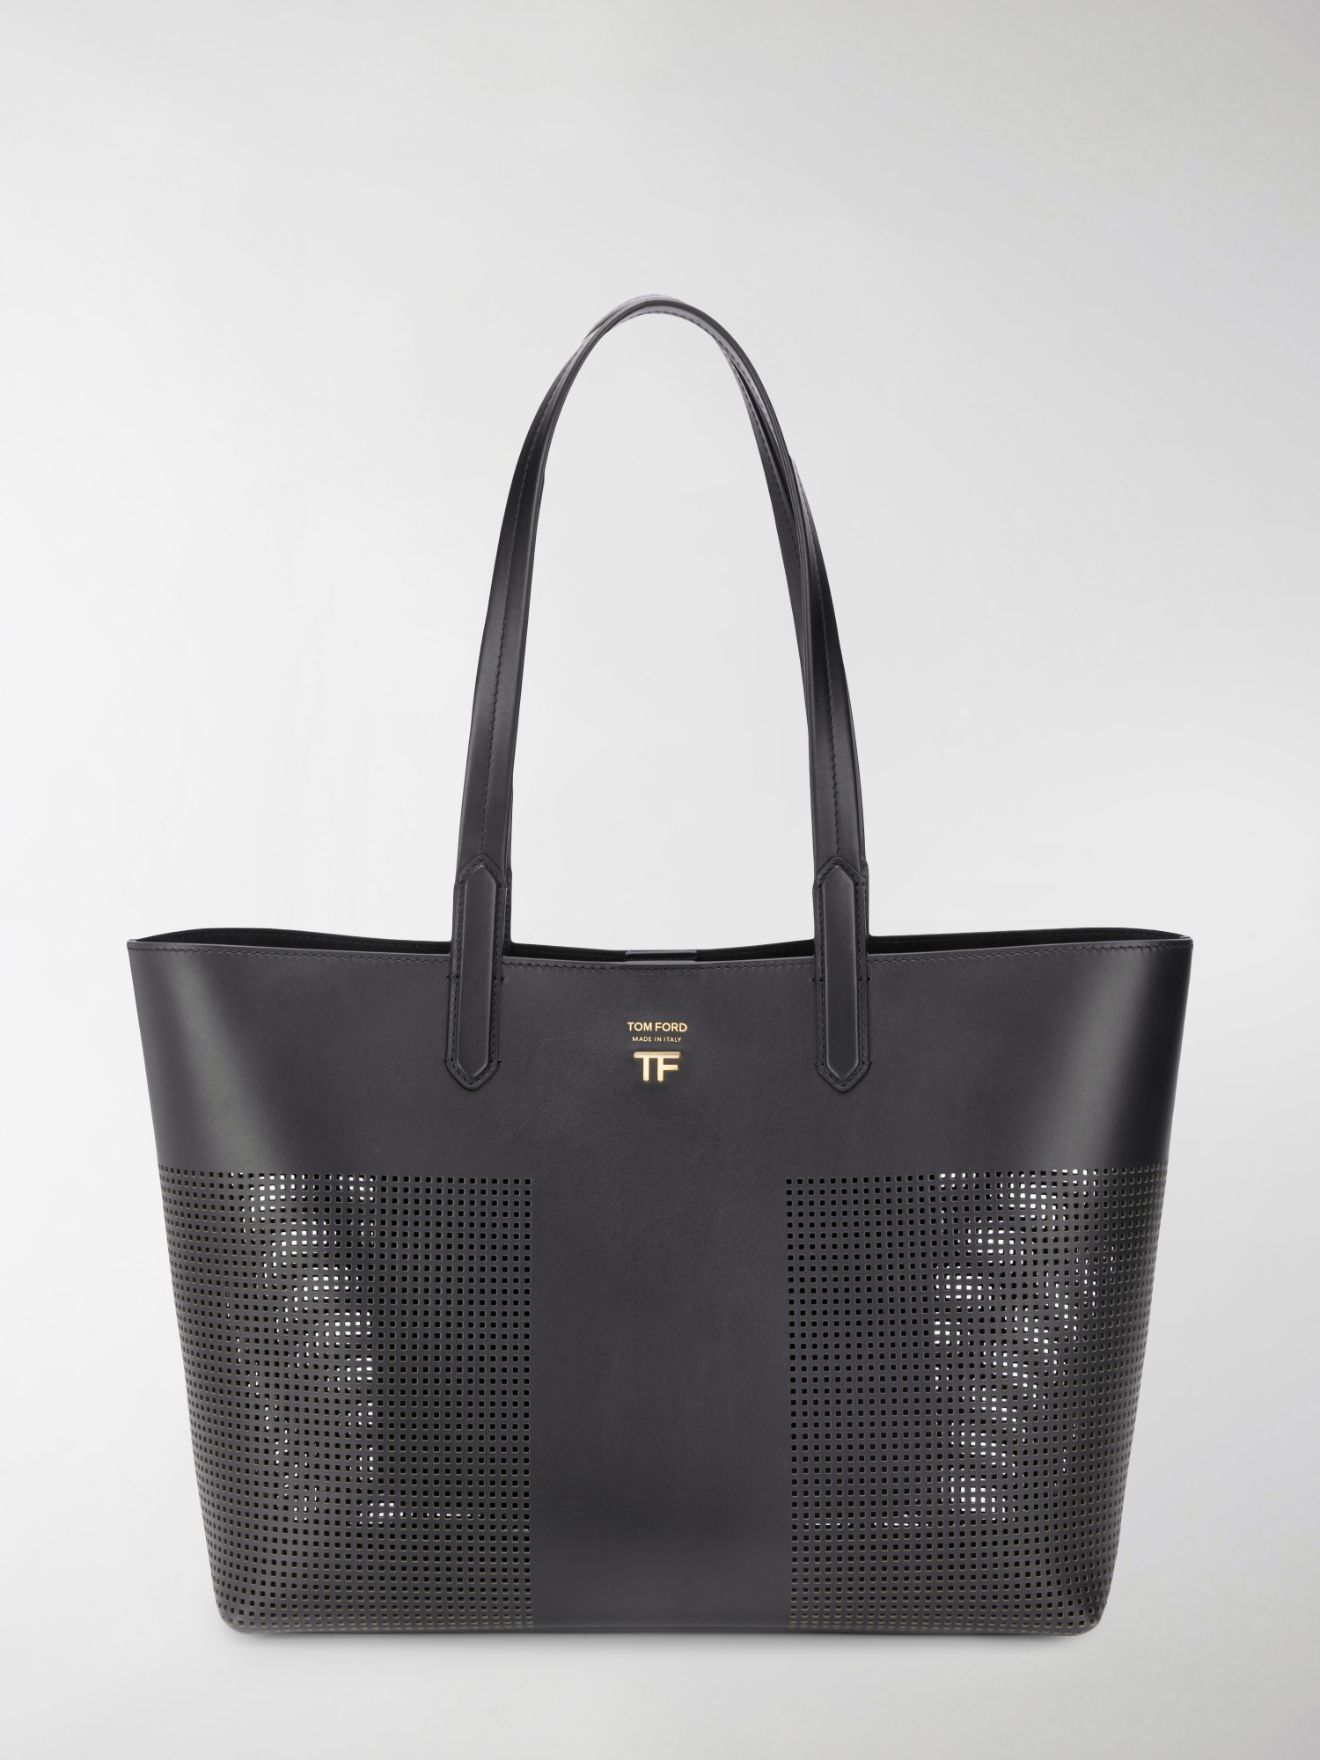 TOM FORD perforated leather tote black | MODES